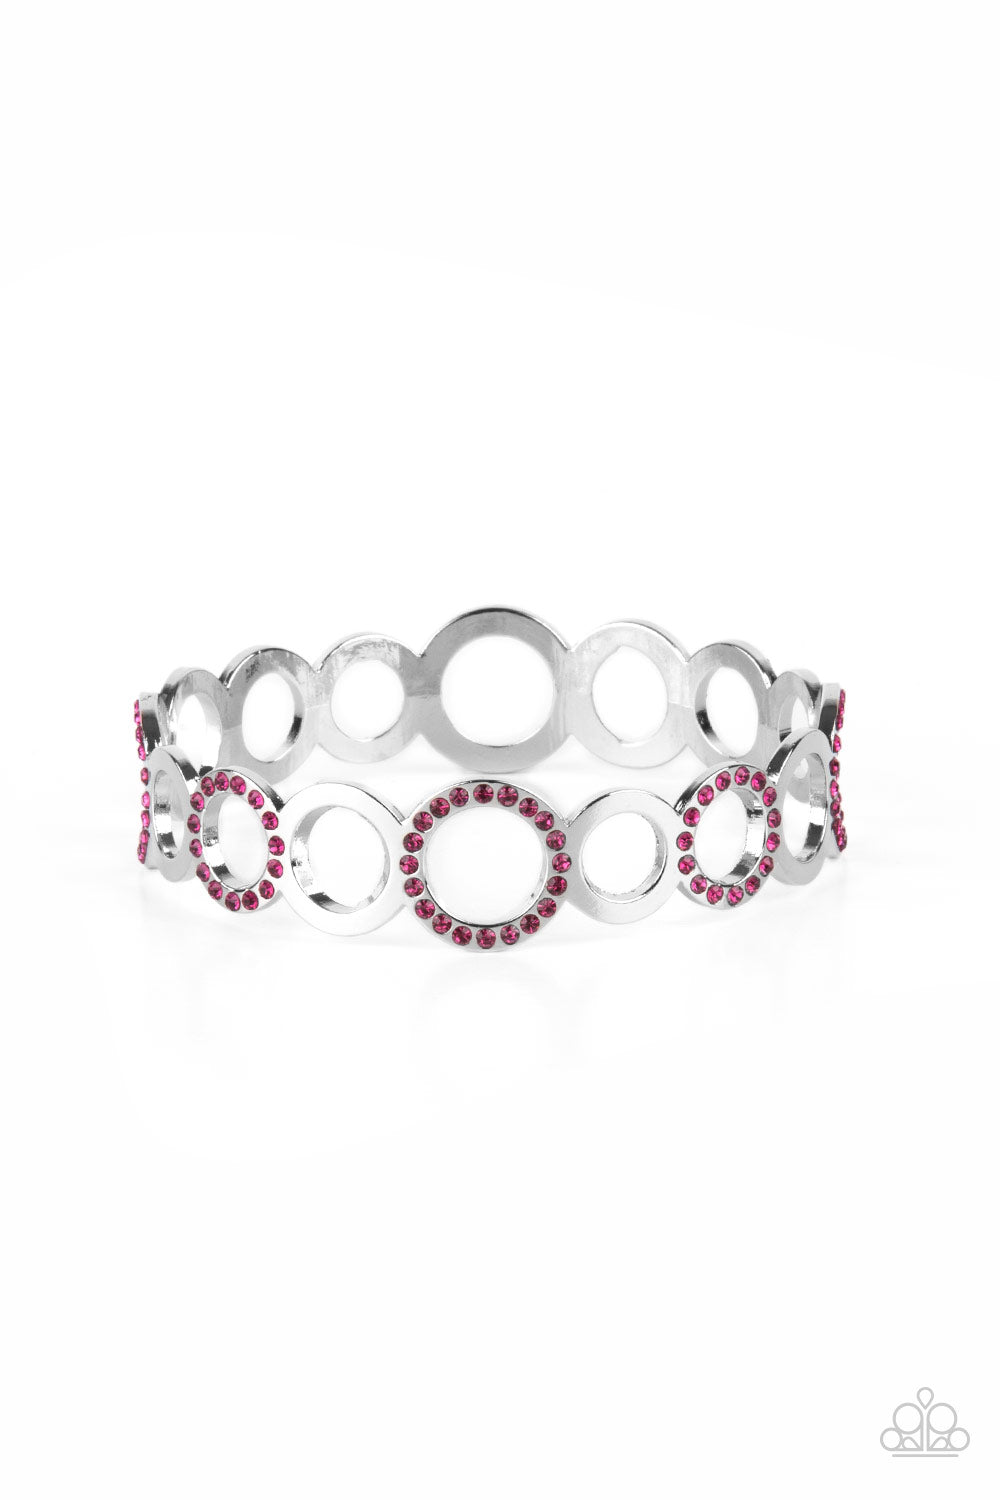 Future, Past, and POLISHED Pink Bangle Bracelet - Paparazzi Accessories  A glittery collection of sparkly pink rhinestone encrusted rings and shiny silver hoops coalesce into an airy bangle around the wrist.  All Paparazzi Accessories are lead free and nickel free!  Sold as one individual bracelet.